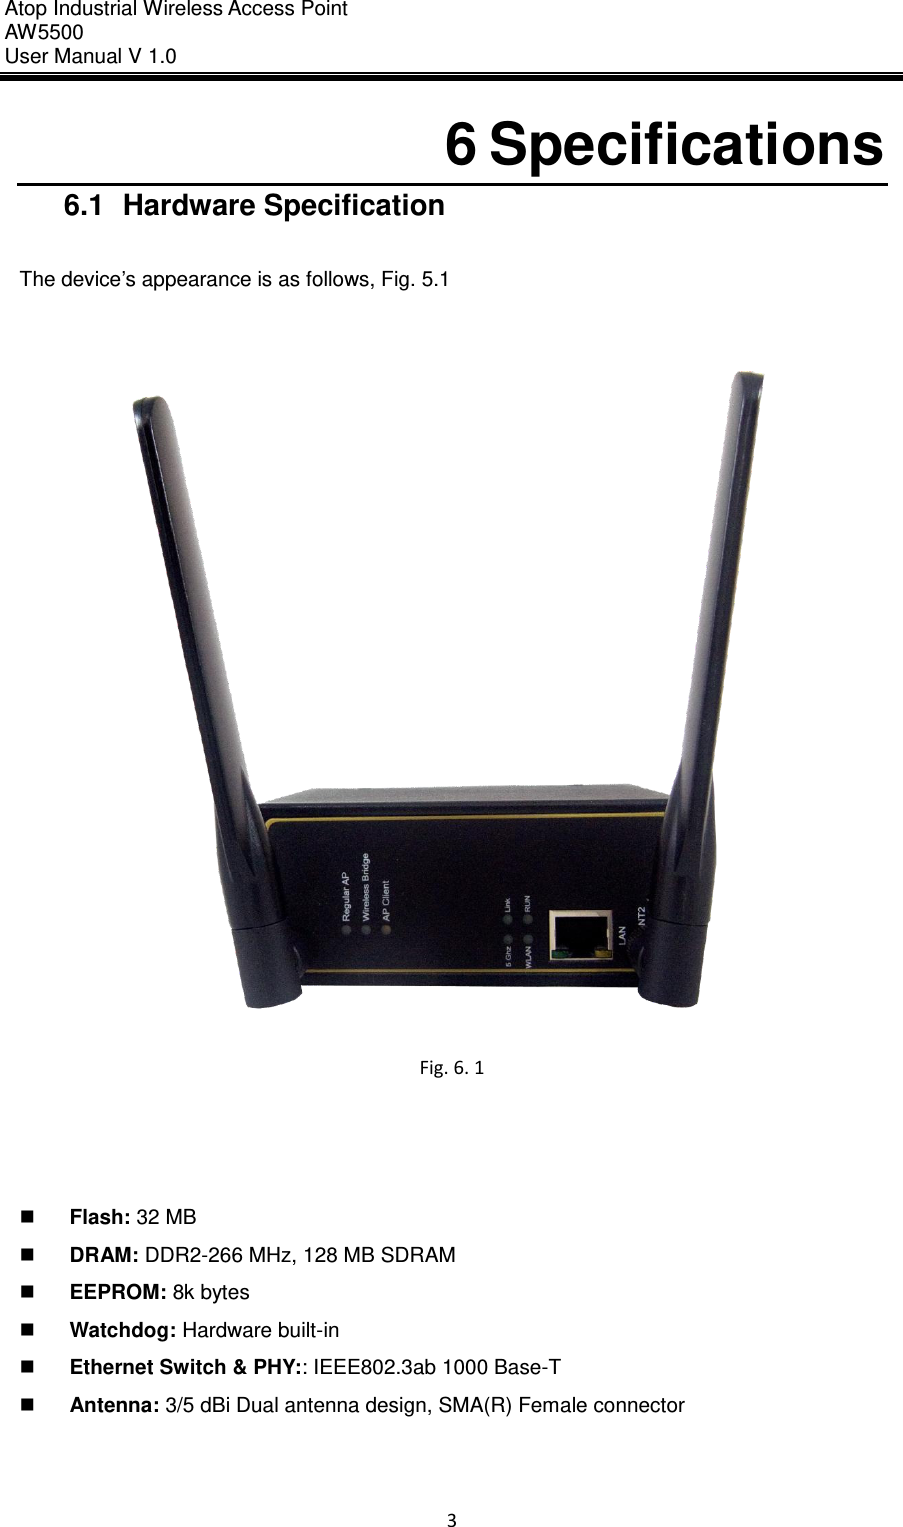 Atop Industrial Wireless Access Point AW 5500 User Manual V 1.0                      3  6 Specifications 6.1  Hardware Specification  The device’s appearance is as follows, Fig. 5.1   Fig. 6. 1     Flash: 32 MB  DRAM: DDR2-266 MHz, 128 MB SDRAM  EEPROM: 8k bytes  Watchdog: Hardware built-in  Ethernet Switch &amp; PHY:: IEEE802.3ab 1000 Base-T  Antenna: 3/5 dBi Dual antenna design, SMA(R) Female connector     